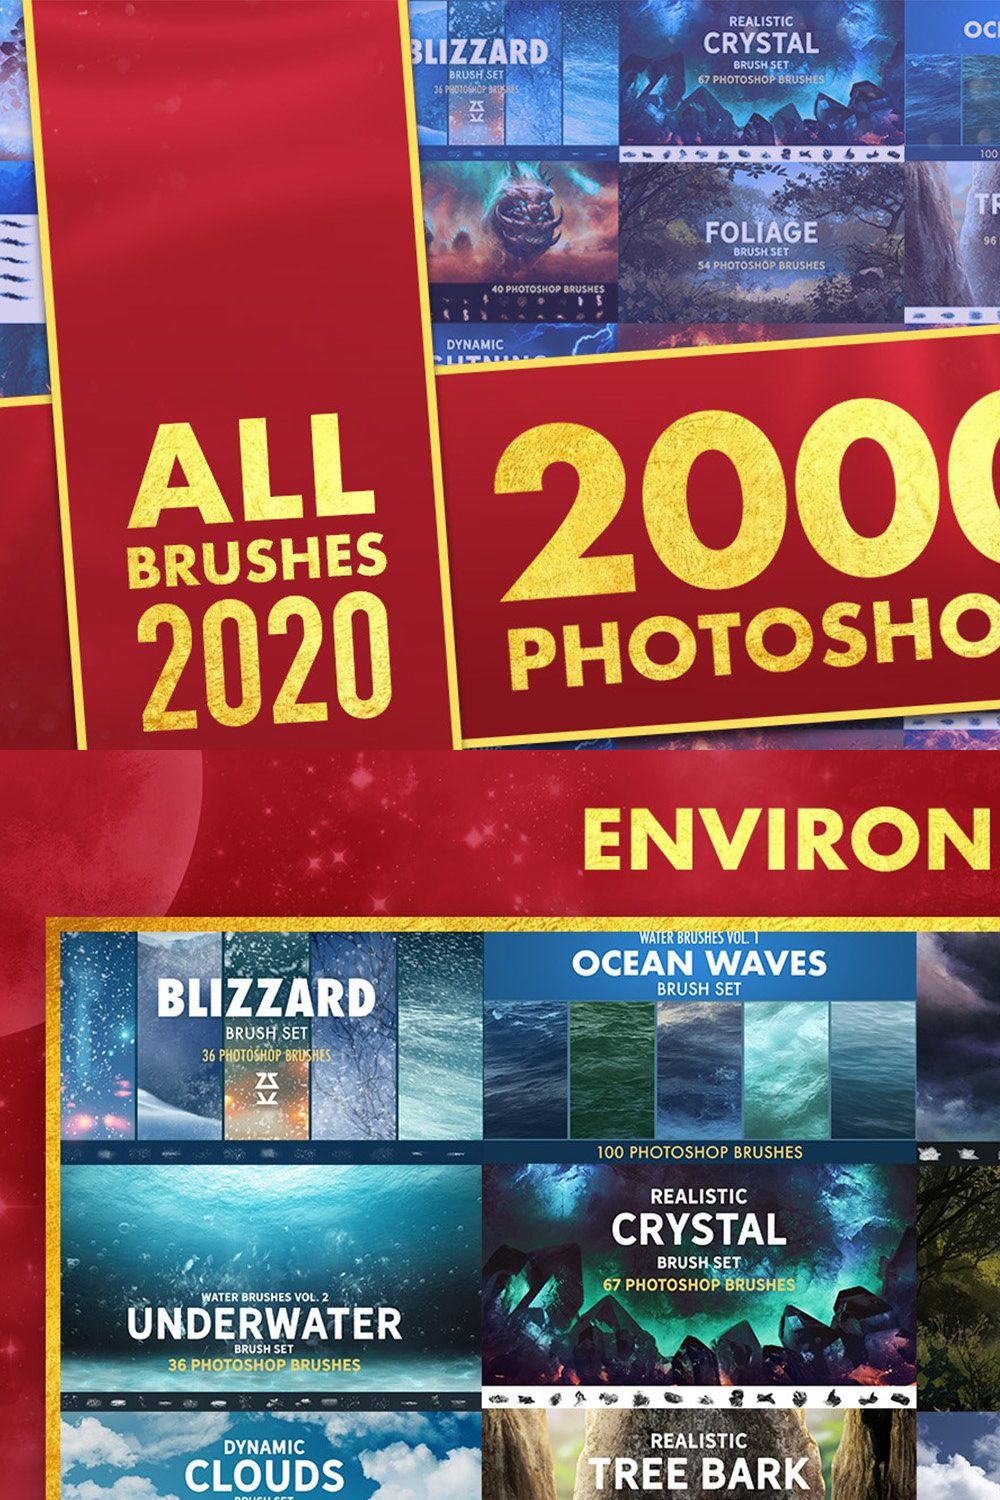 All Brushes 2020 Bundle pinterest preview image.